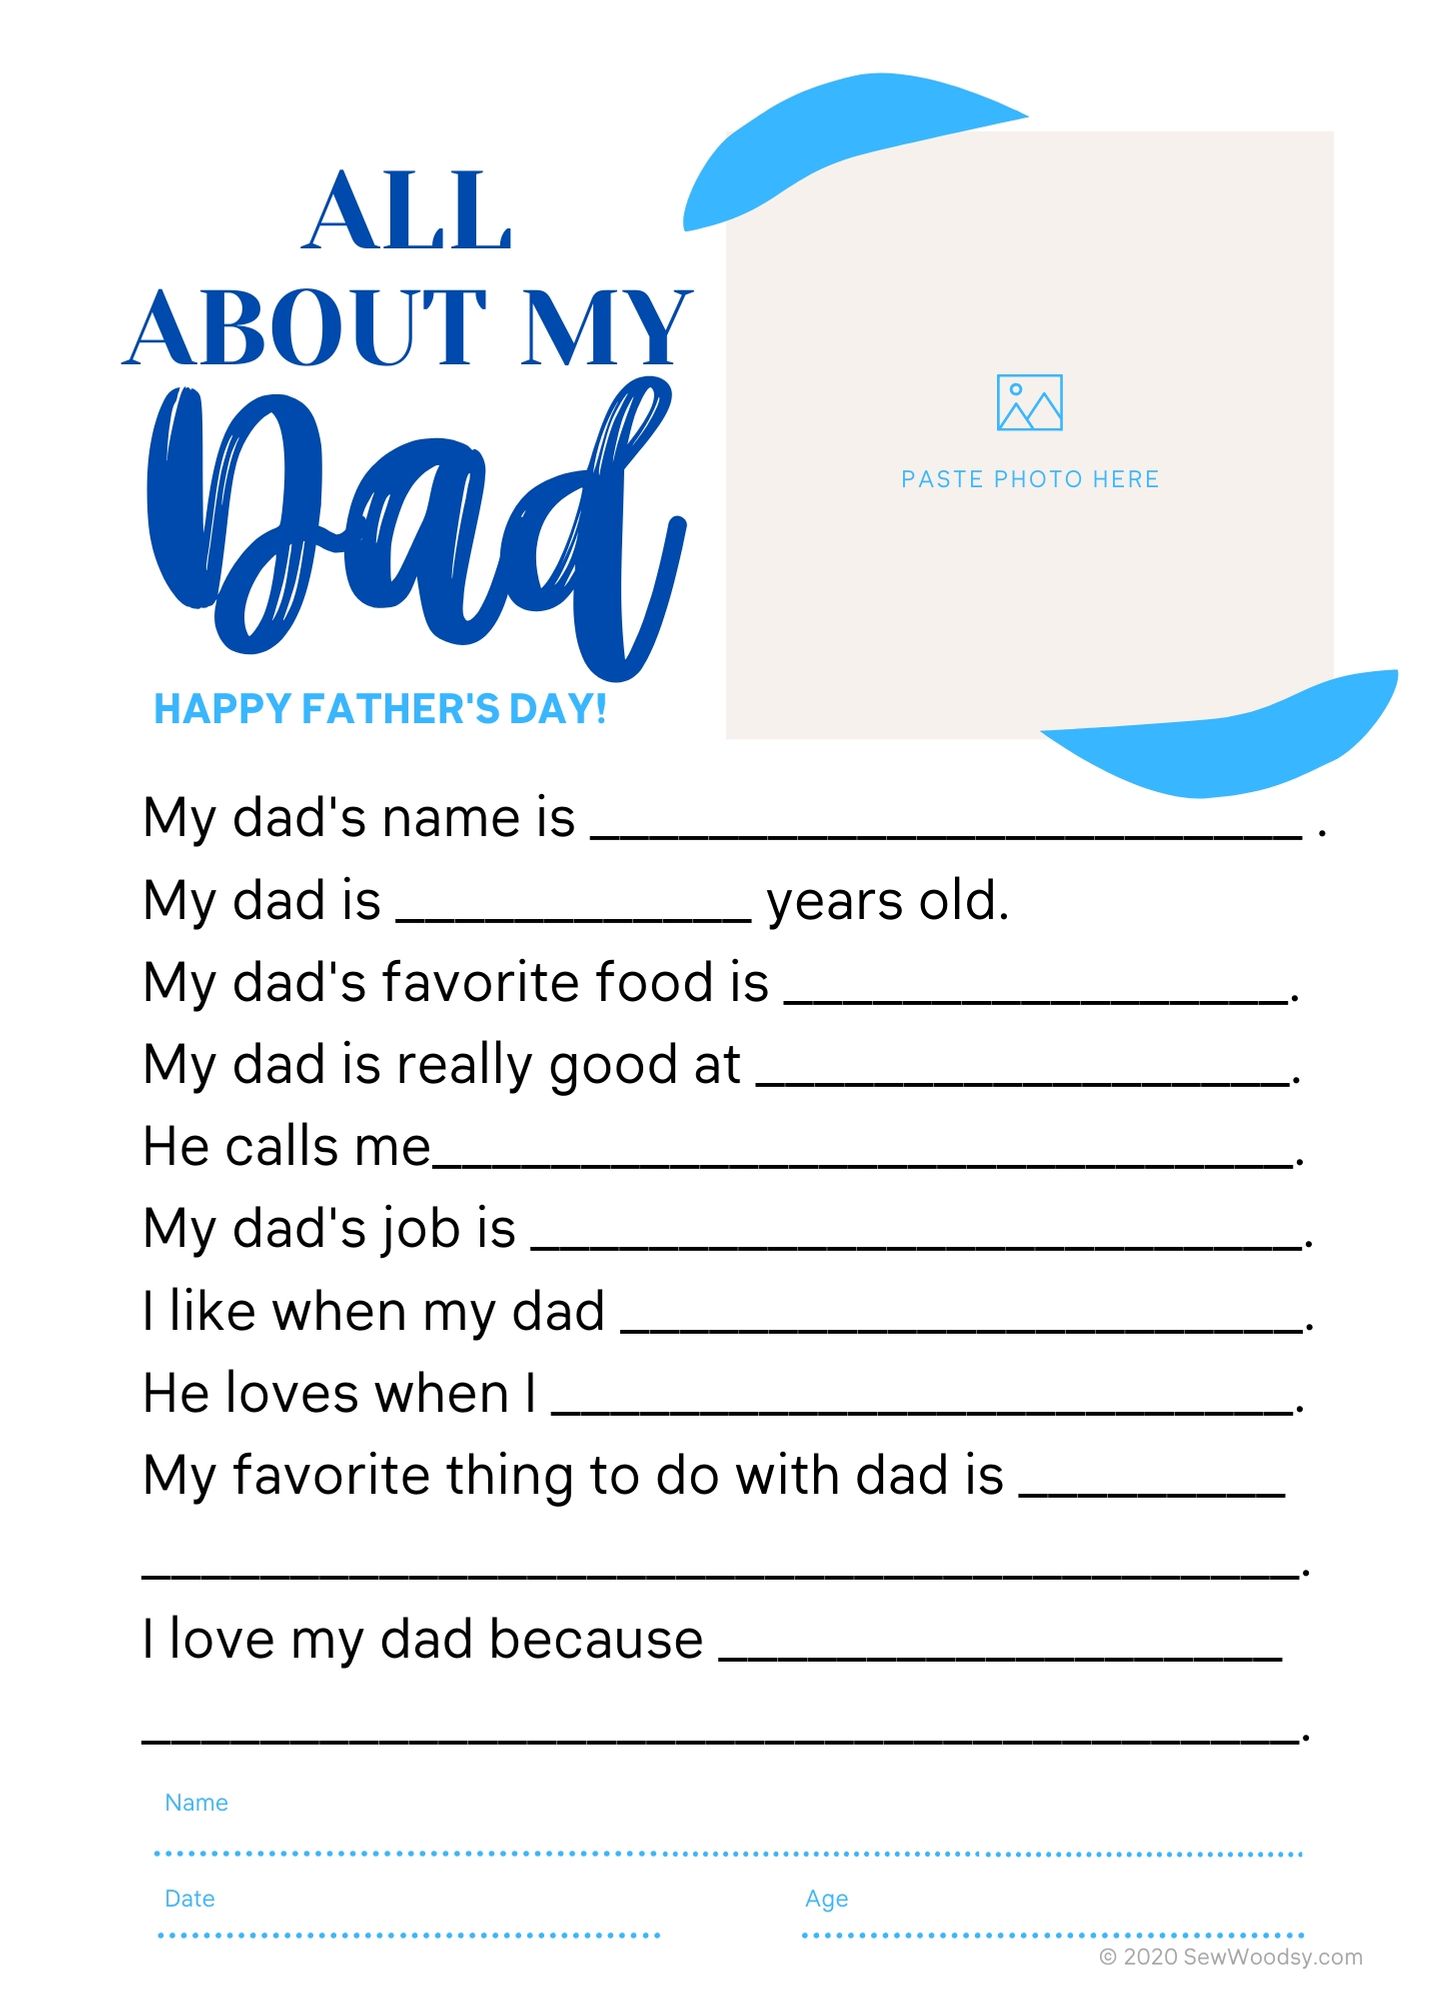 Free Father’s Day Printable with Photo